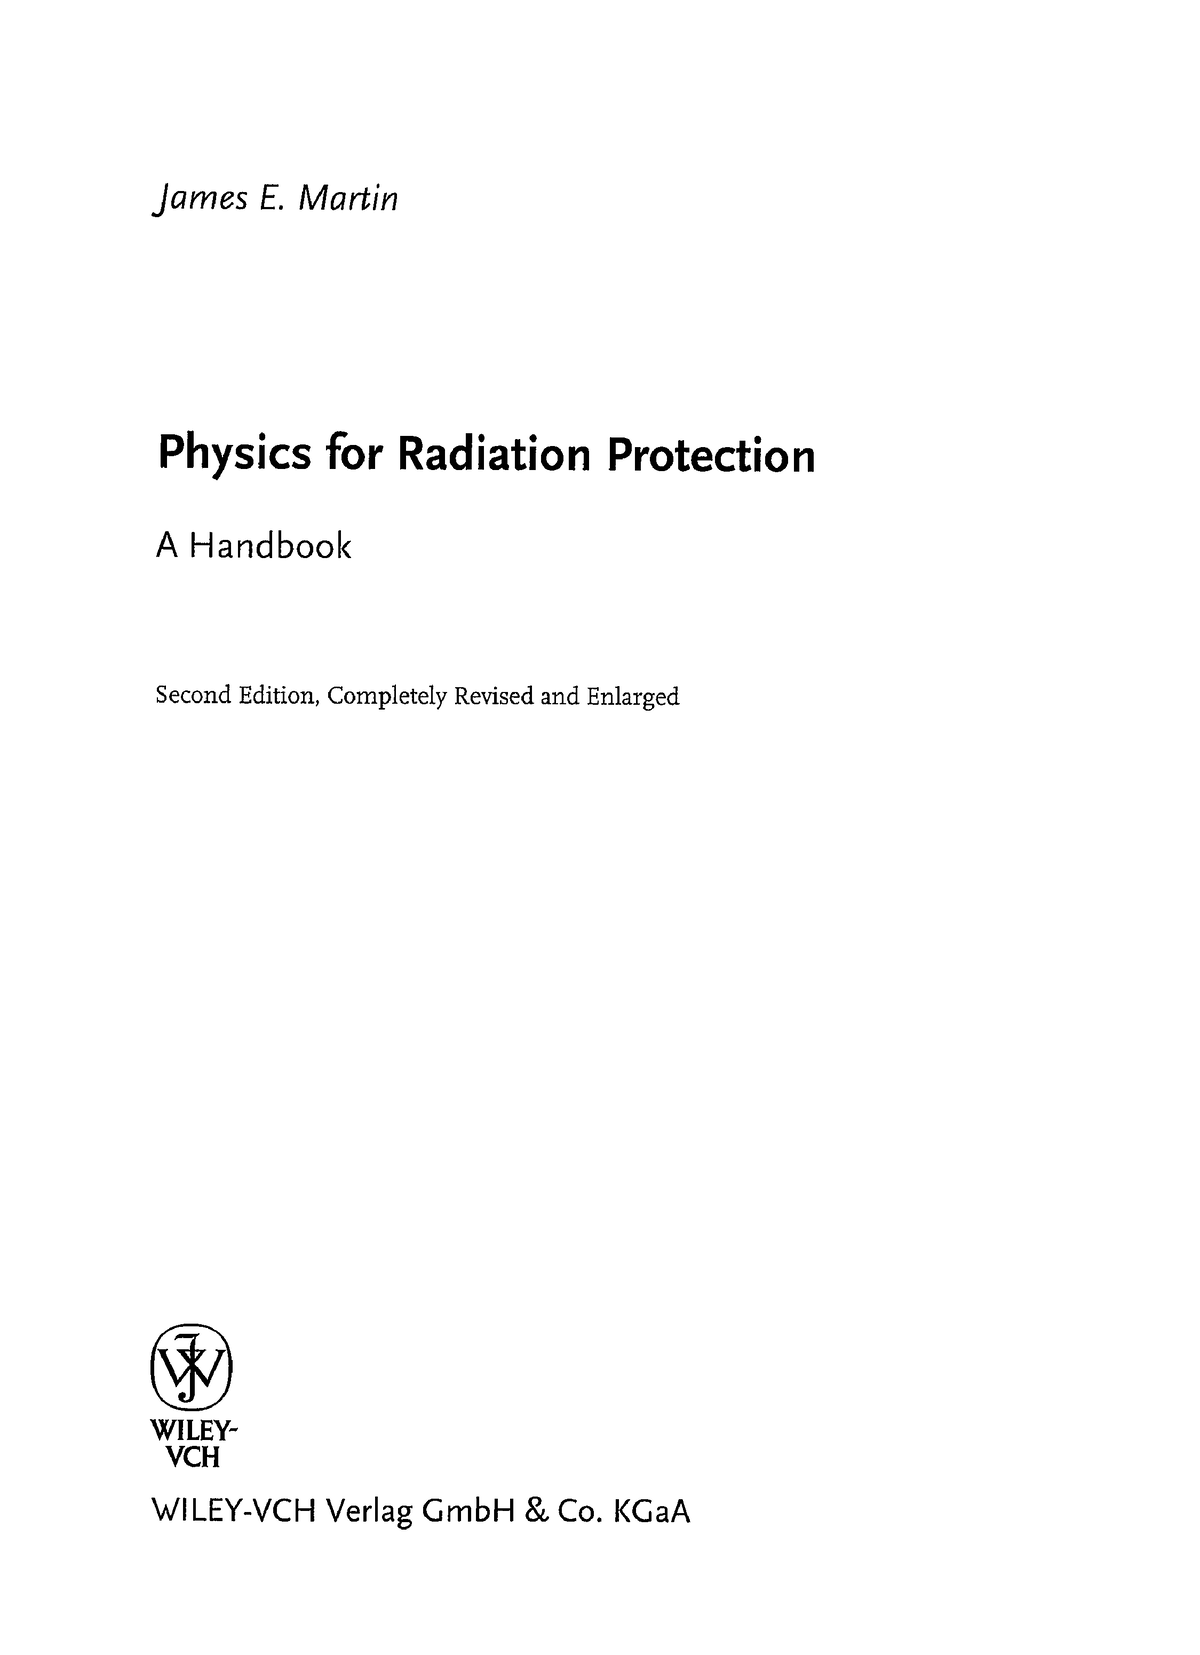 44143316-radiation-detection-reference-documents-james-e-martin